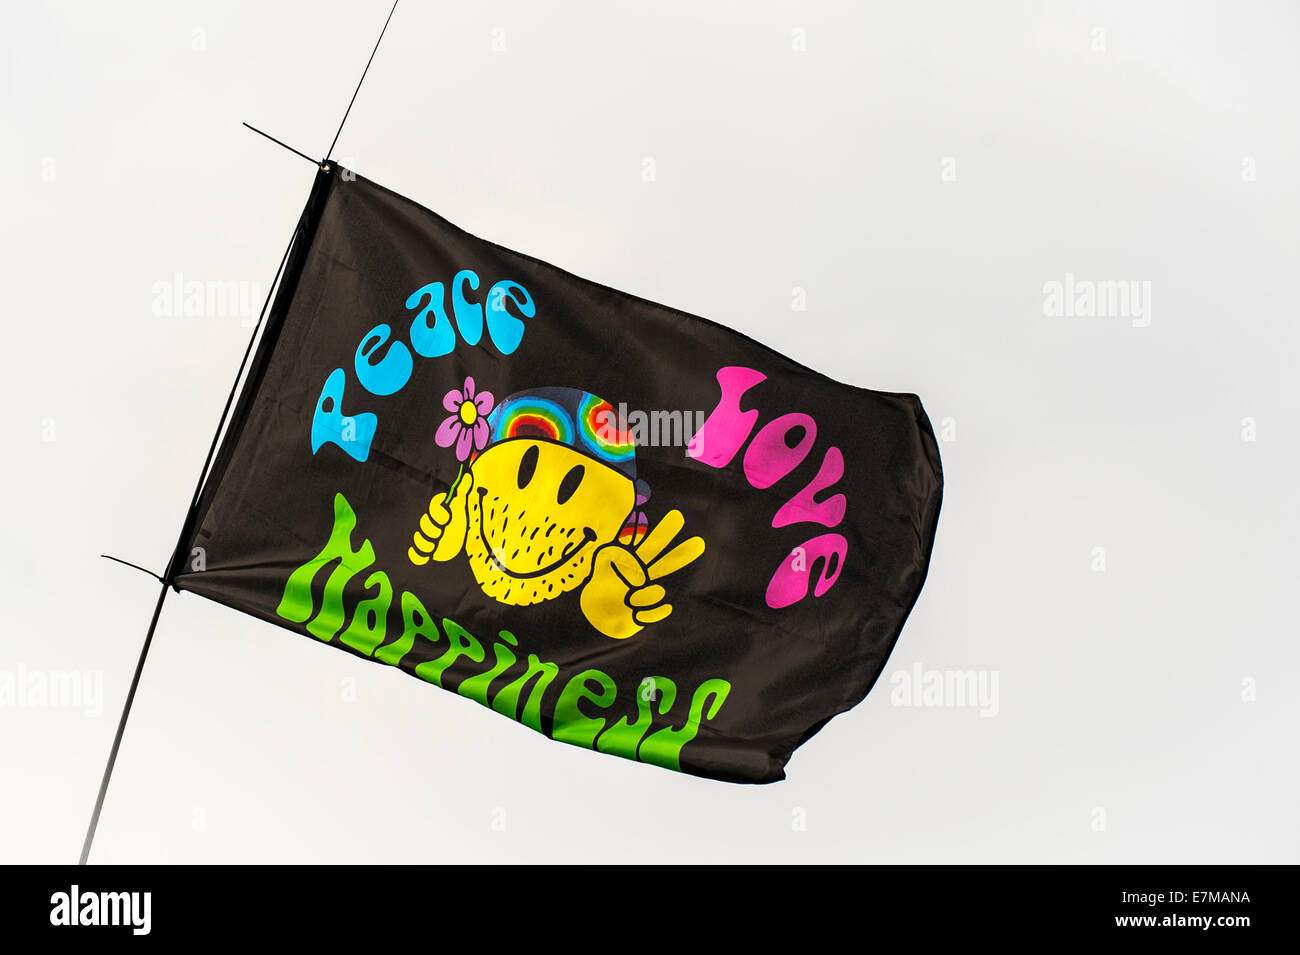 A Peace, Love and Happiness flag flying at the Brownstock Festival in Essex. Stock Photo